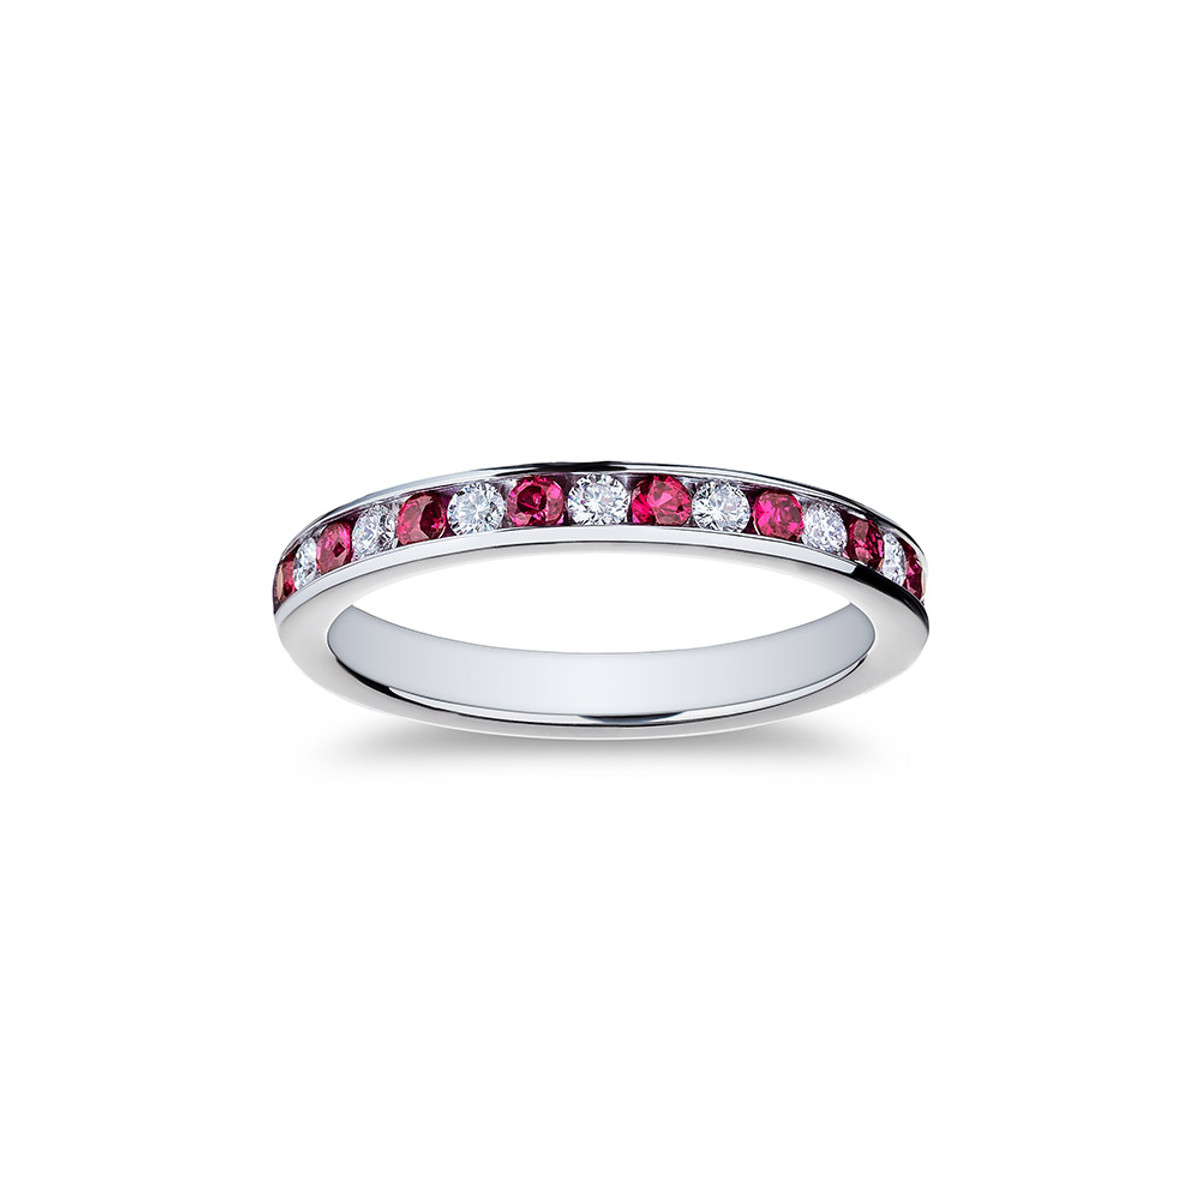 18KW DIAMOND AND RUBY BAND D=0.22CTTW RUBY=0.30CTTW-43282 Product Image